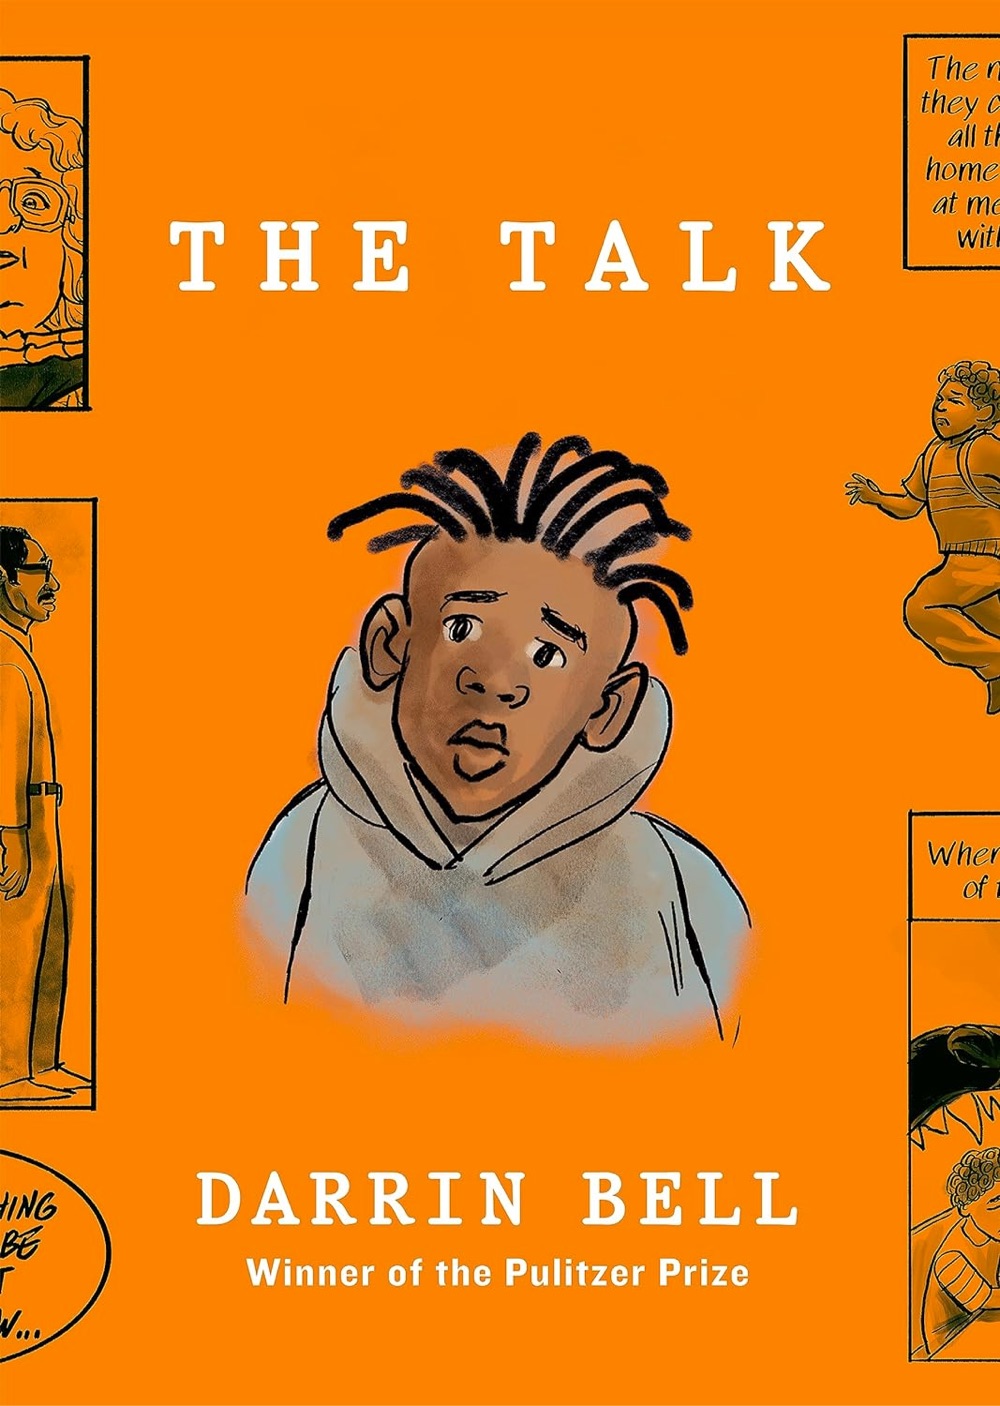 the cover for a graphic novel called The Talk by Darrin Bell